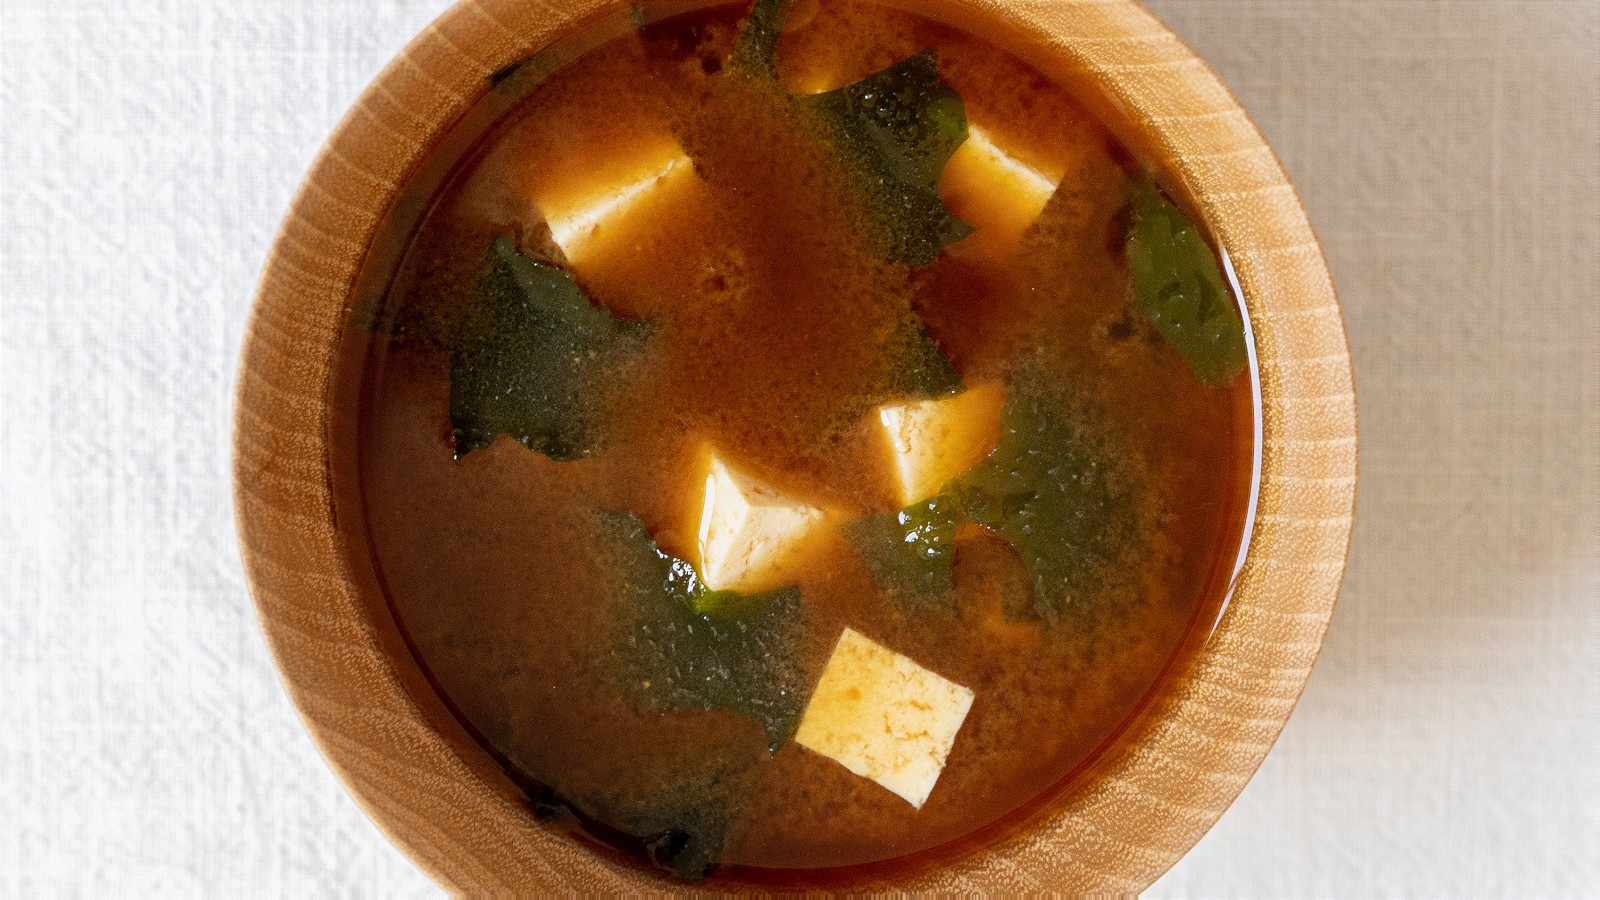 Image of Recette soupe miso traditionnelle